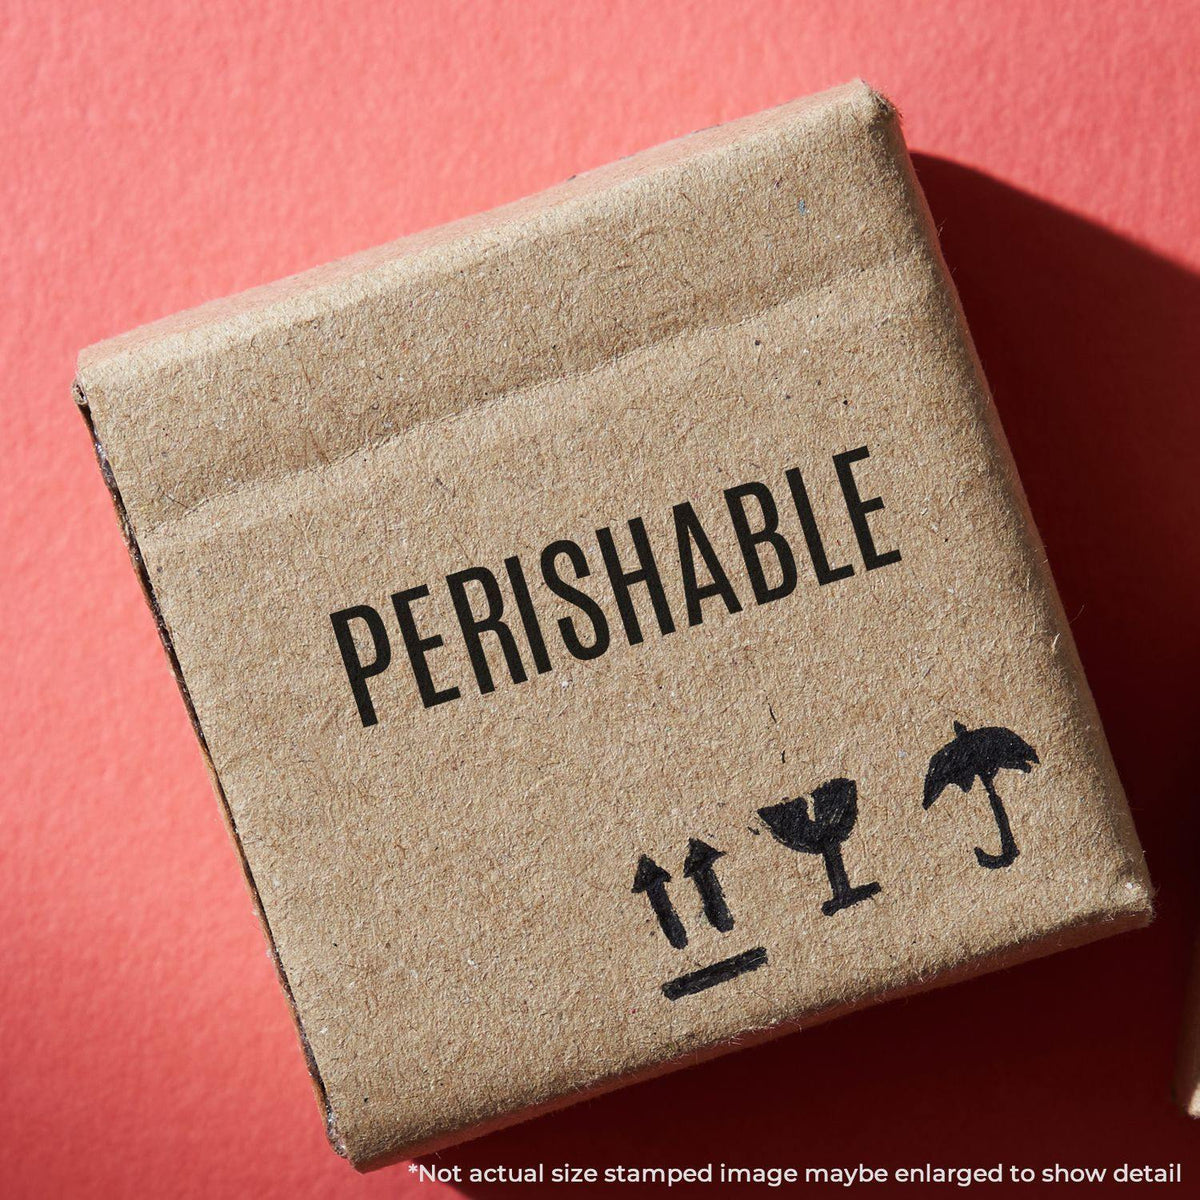 Large Perishable Rubber Stamp In Use Photo